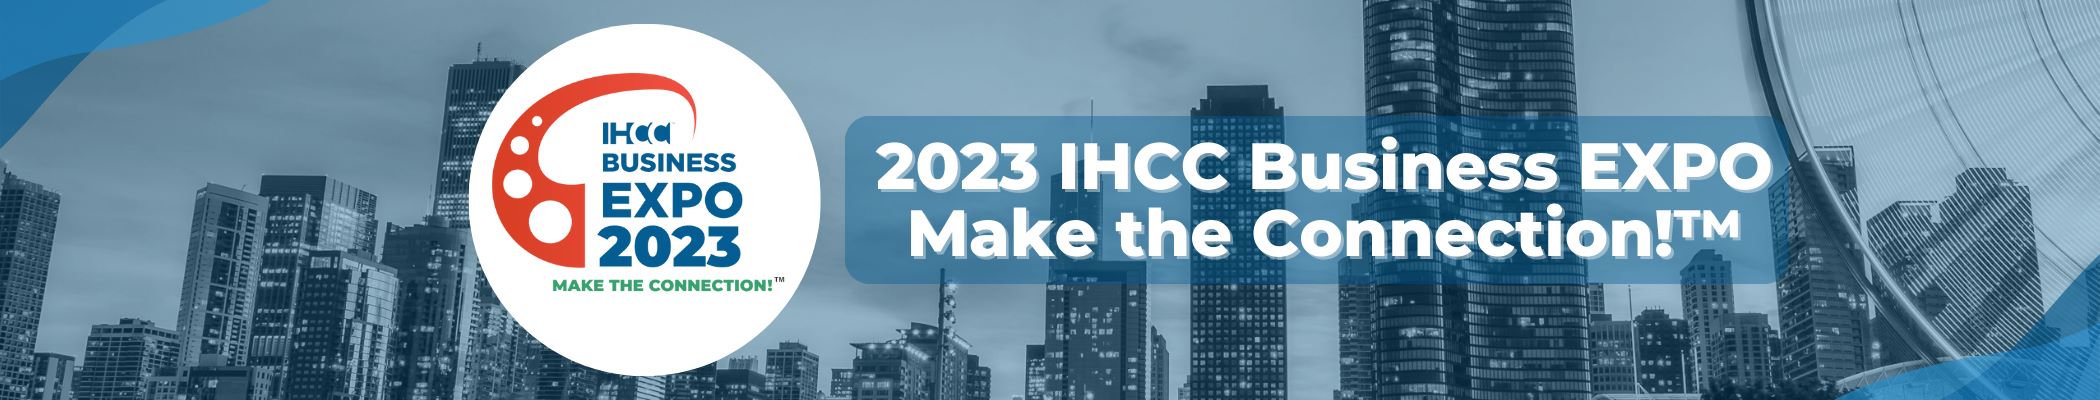 2023 IHCC Business Expo at Navy Pier Graphic